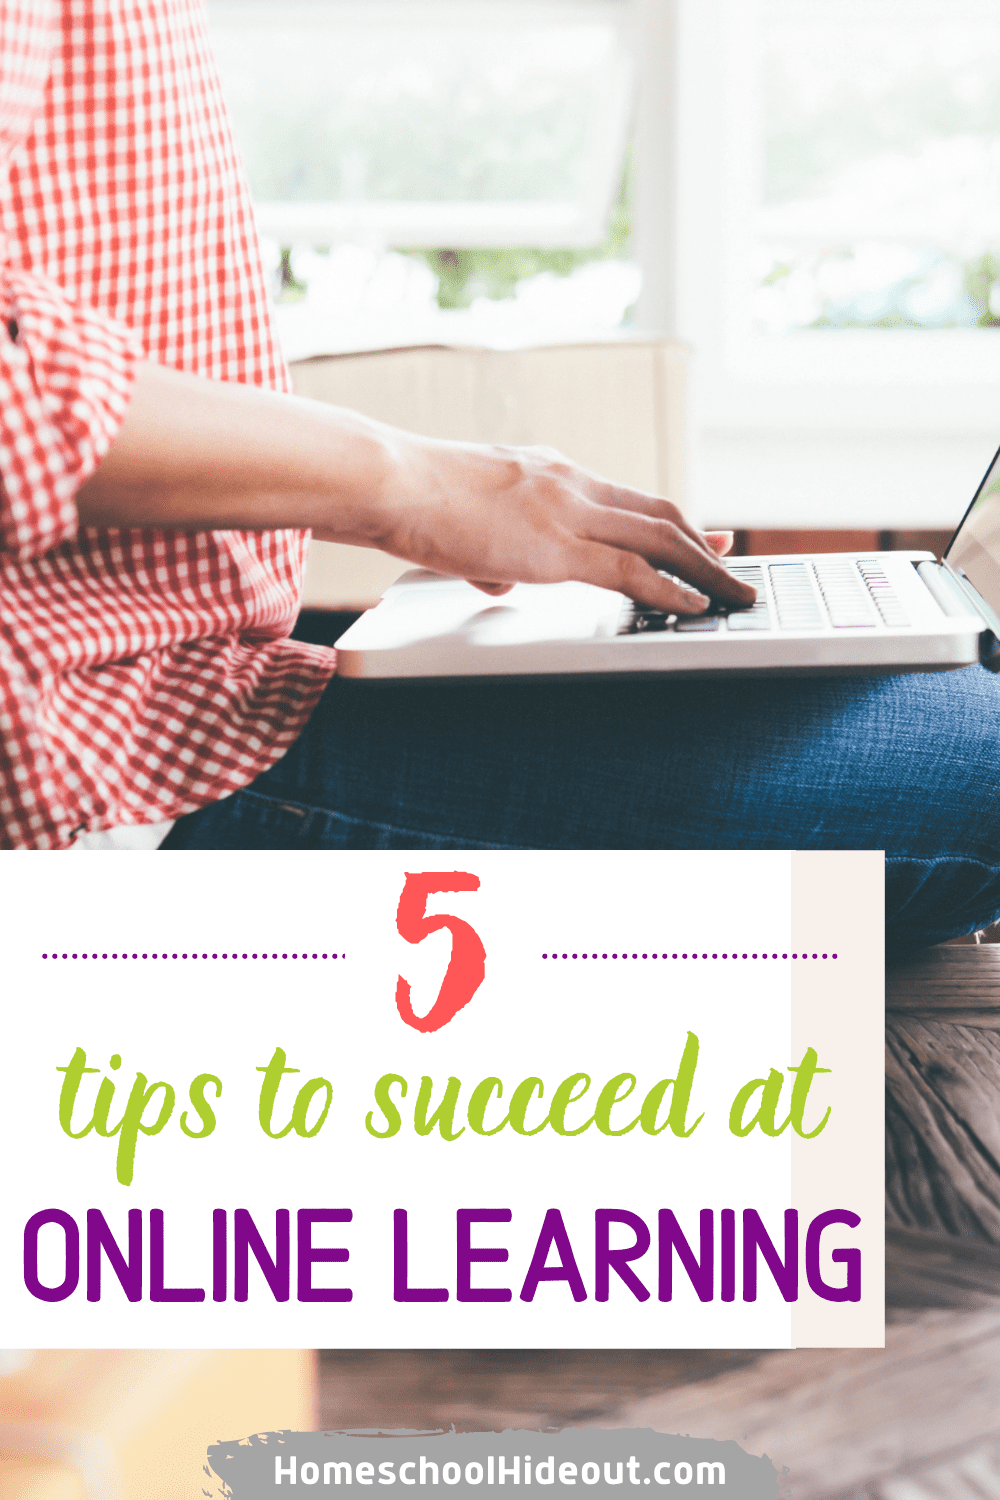 Excelling at online learning doesn't have to be stressful! I love tip #4 and would've never thought of it!